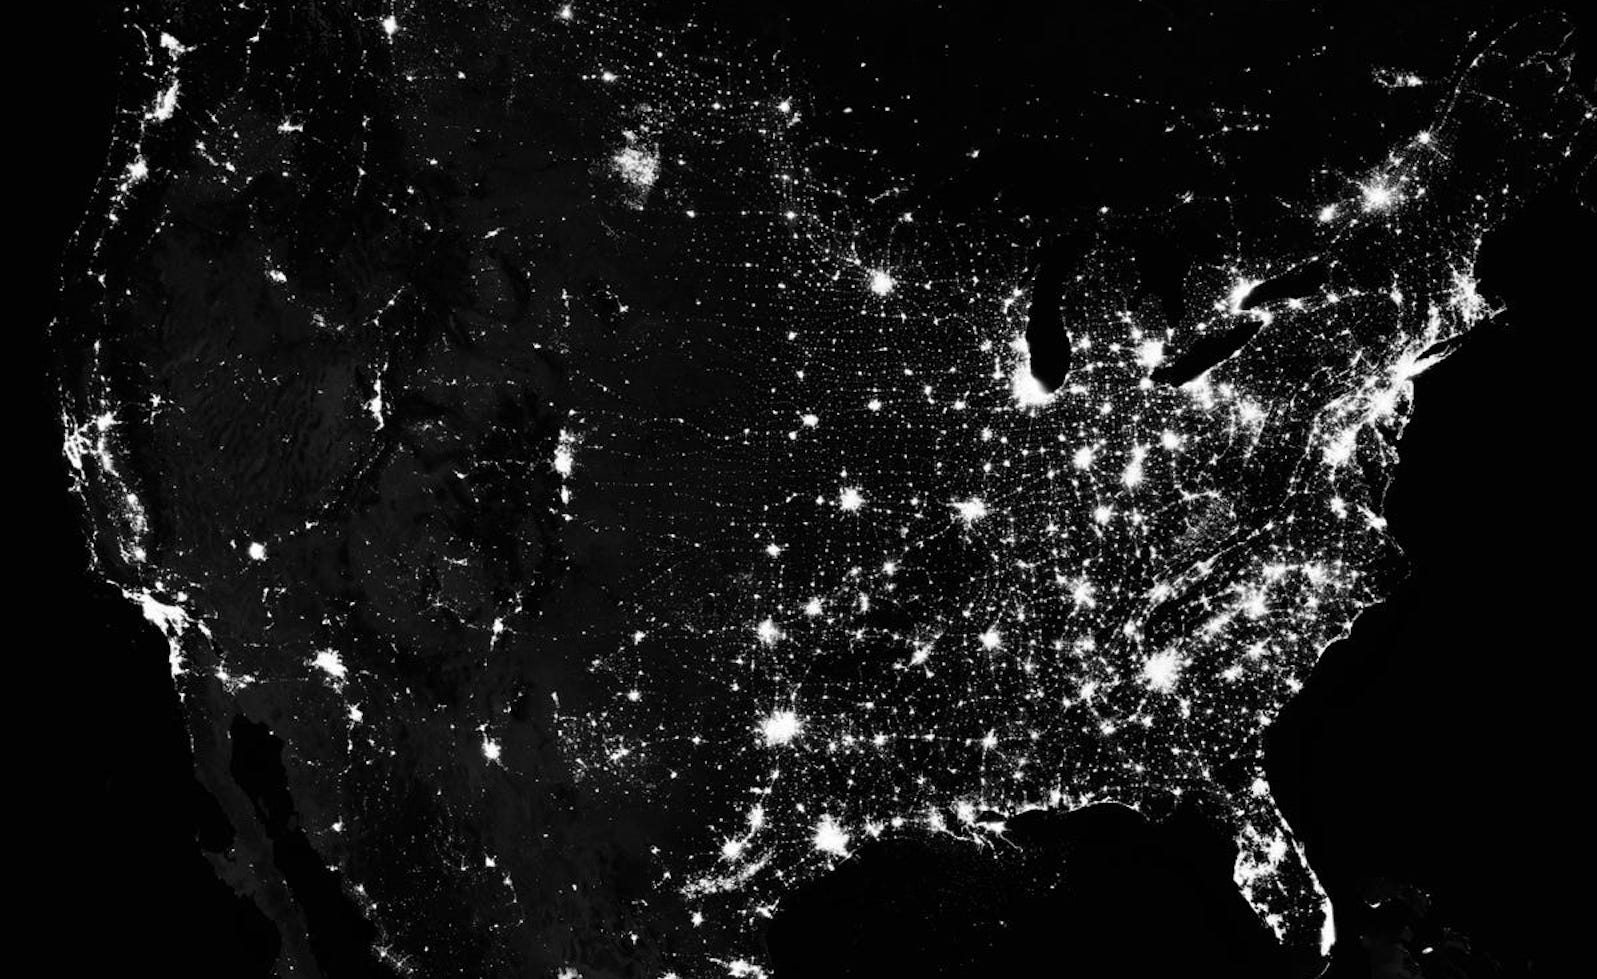 A map of the US displayed by lights in particular clusters around big cities all set against a pitch black background